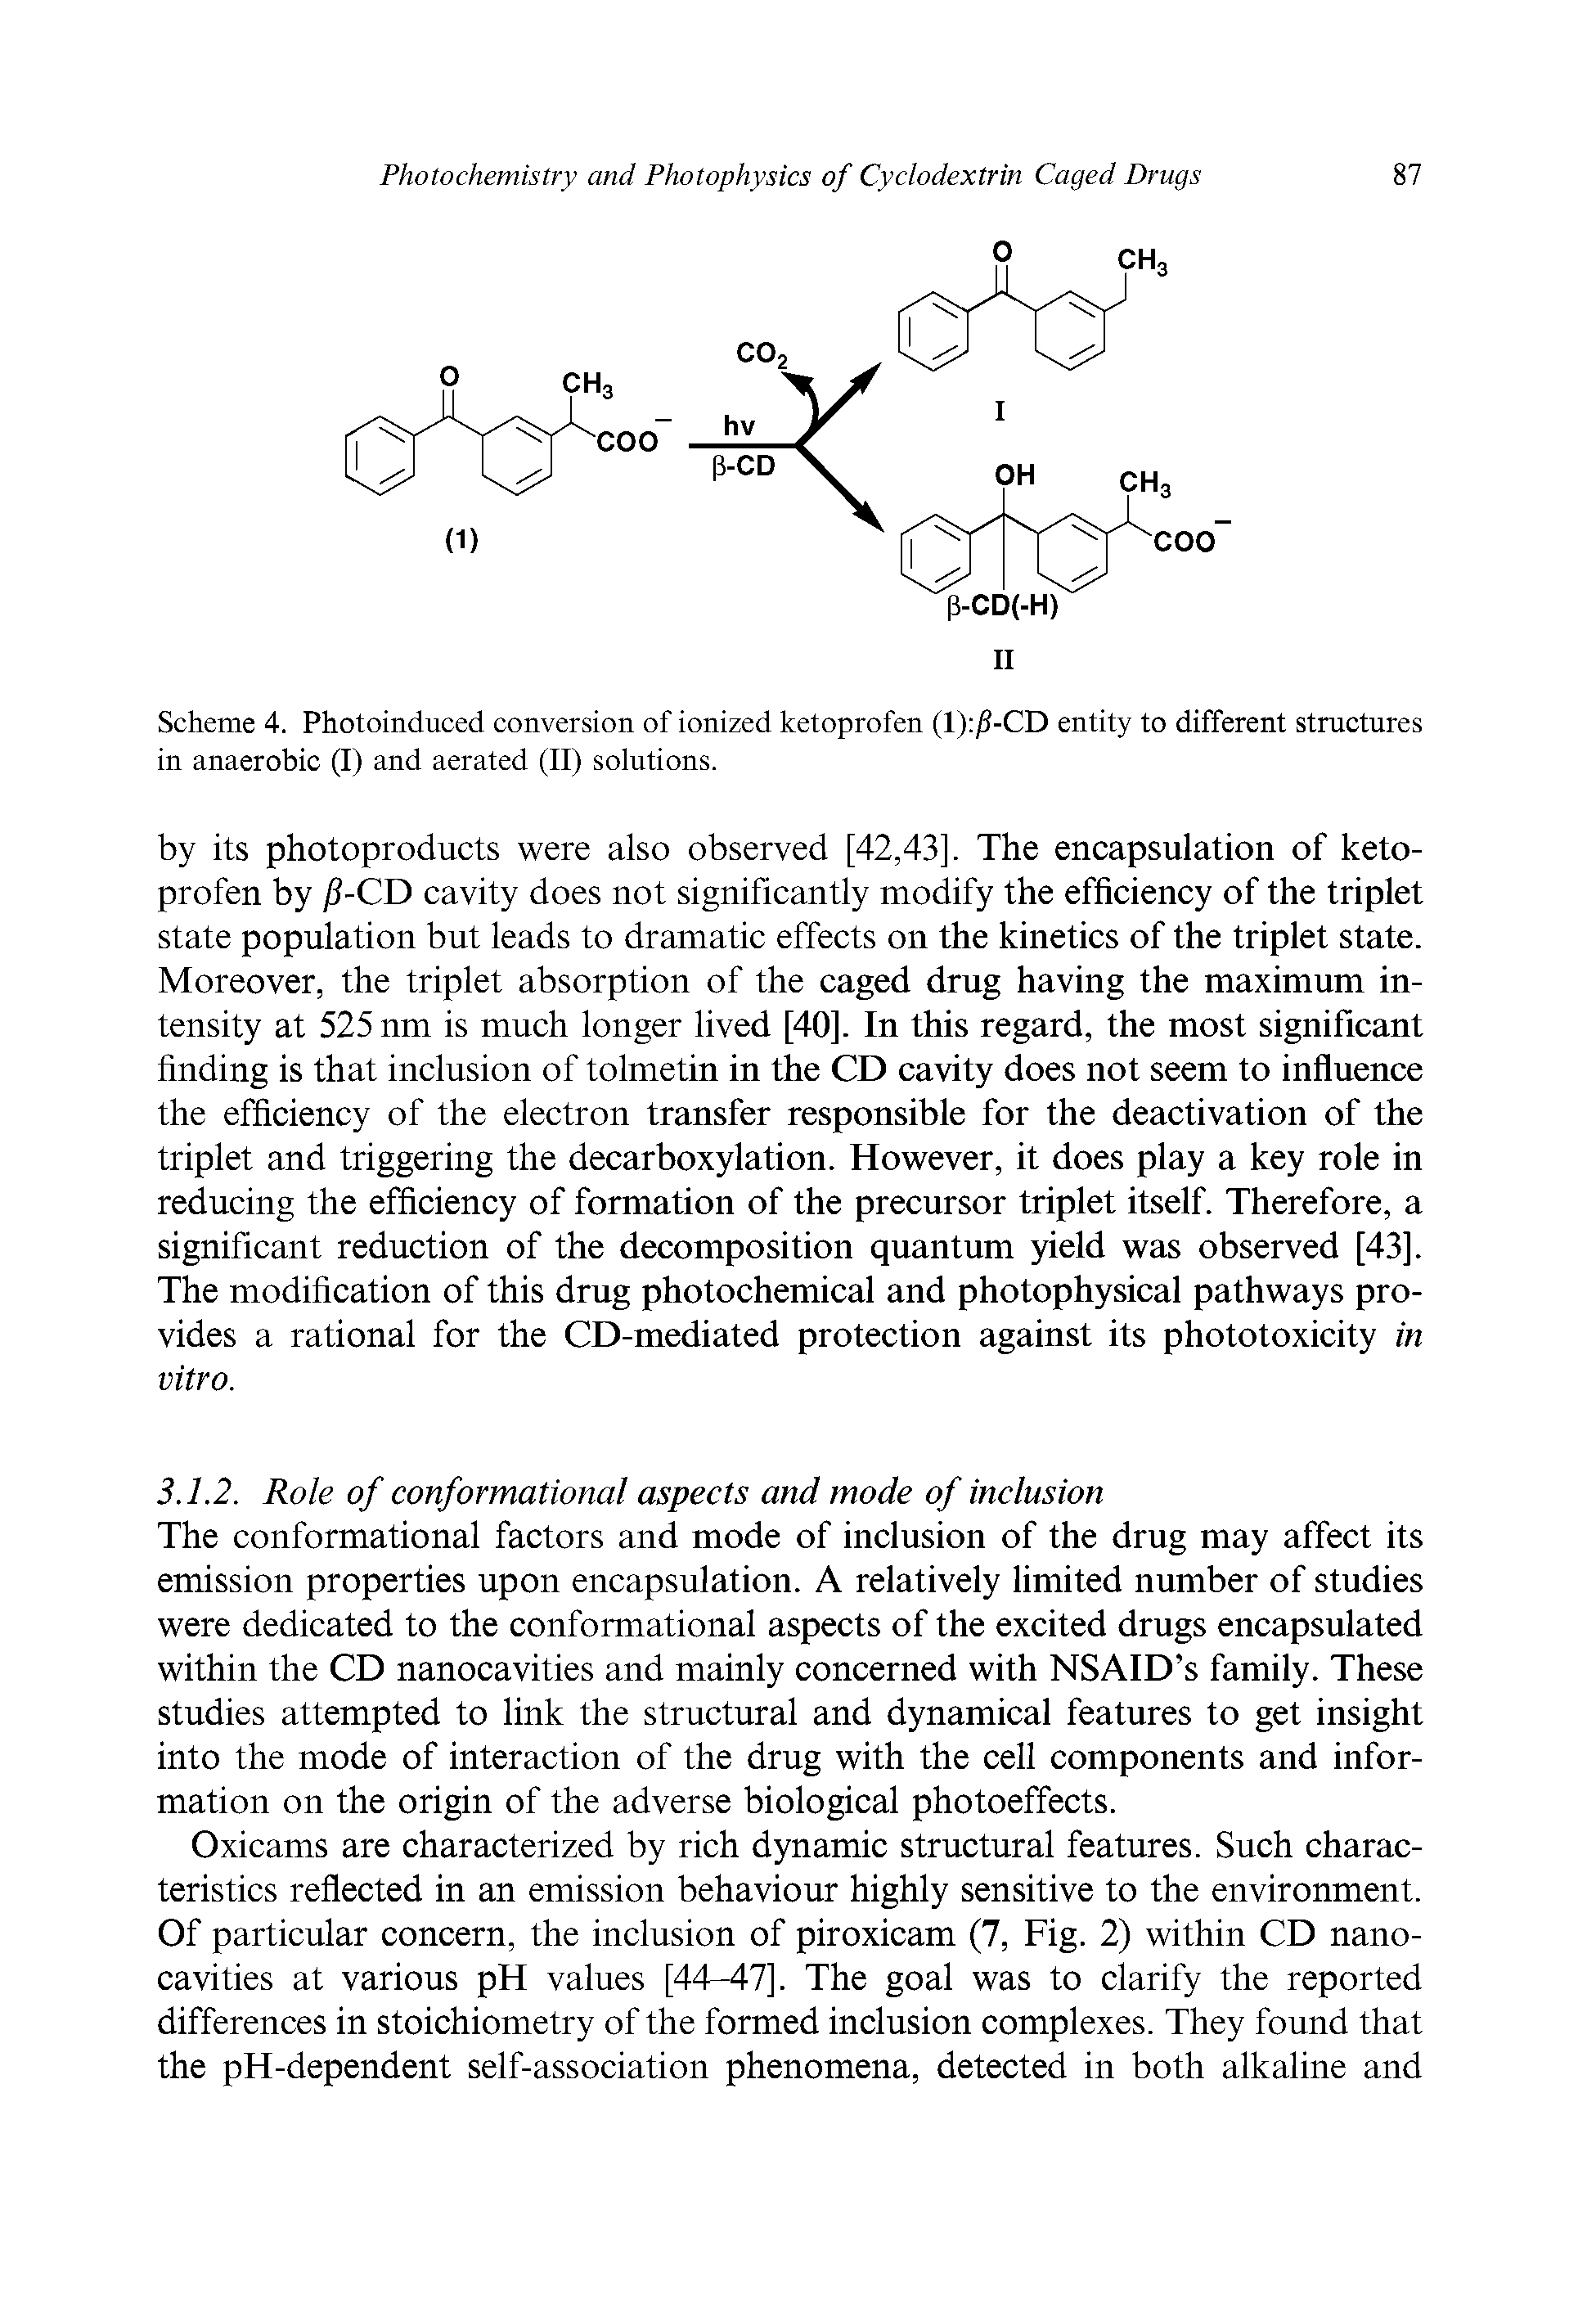 Scheme 4. Photoinduced conversion of ionized ketoprofen (1) -CD entity to different structures in anaerobic (I) and aerated (II) solutions.